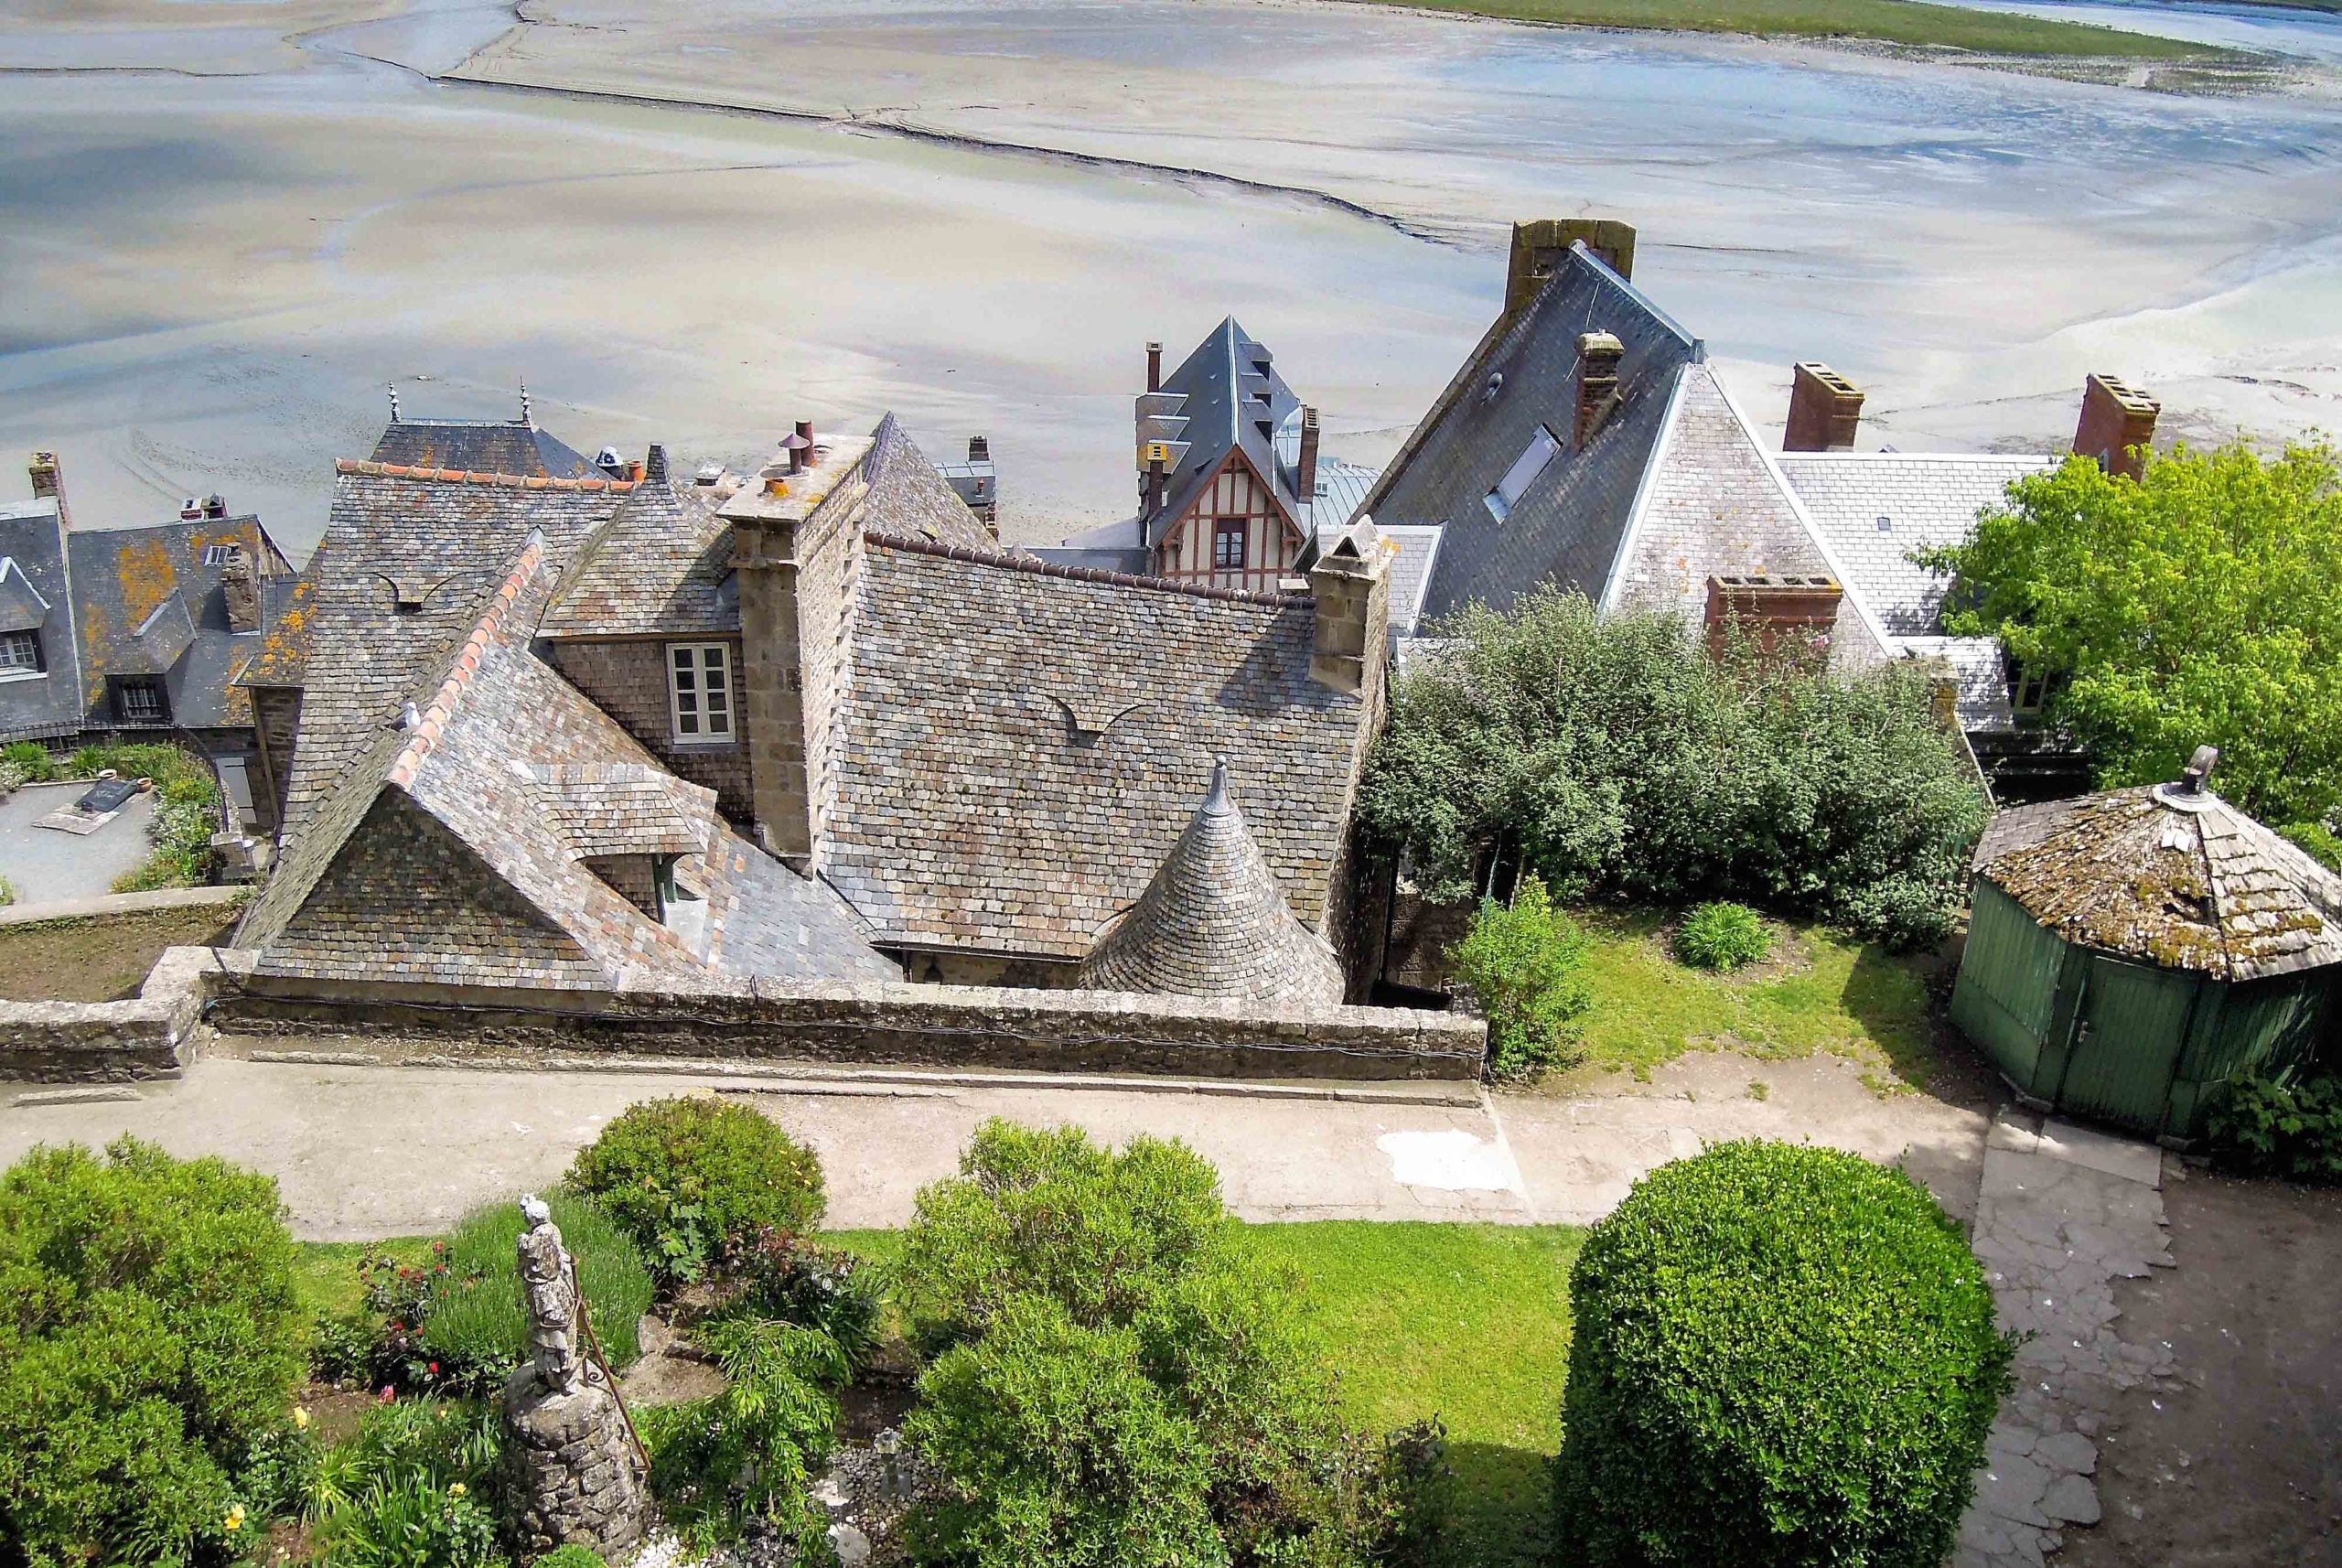 Villages in France - Mont Saint-Michel © Horst J. Meuter - licence [CC BY-SA 4.0] from Wikimedia Commons